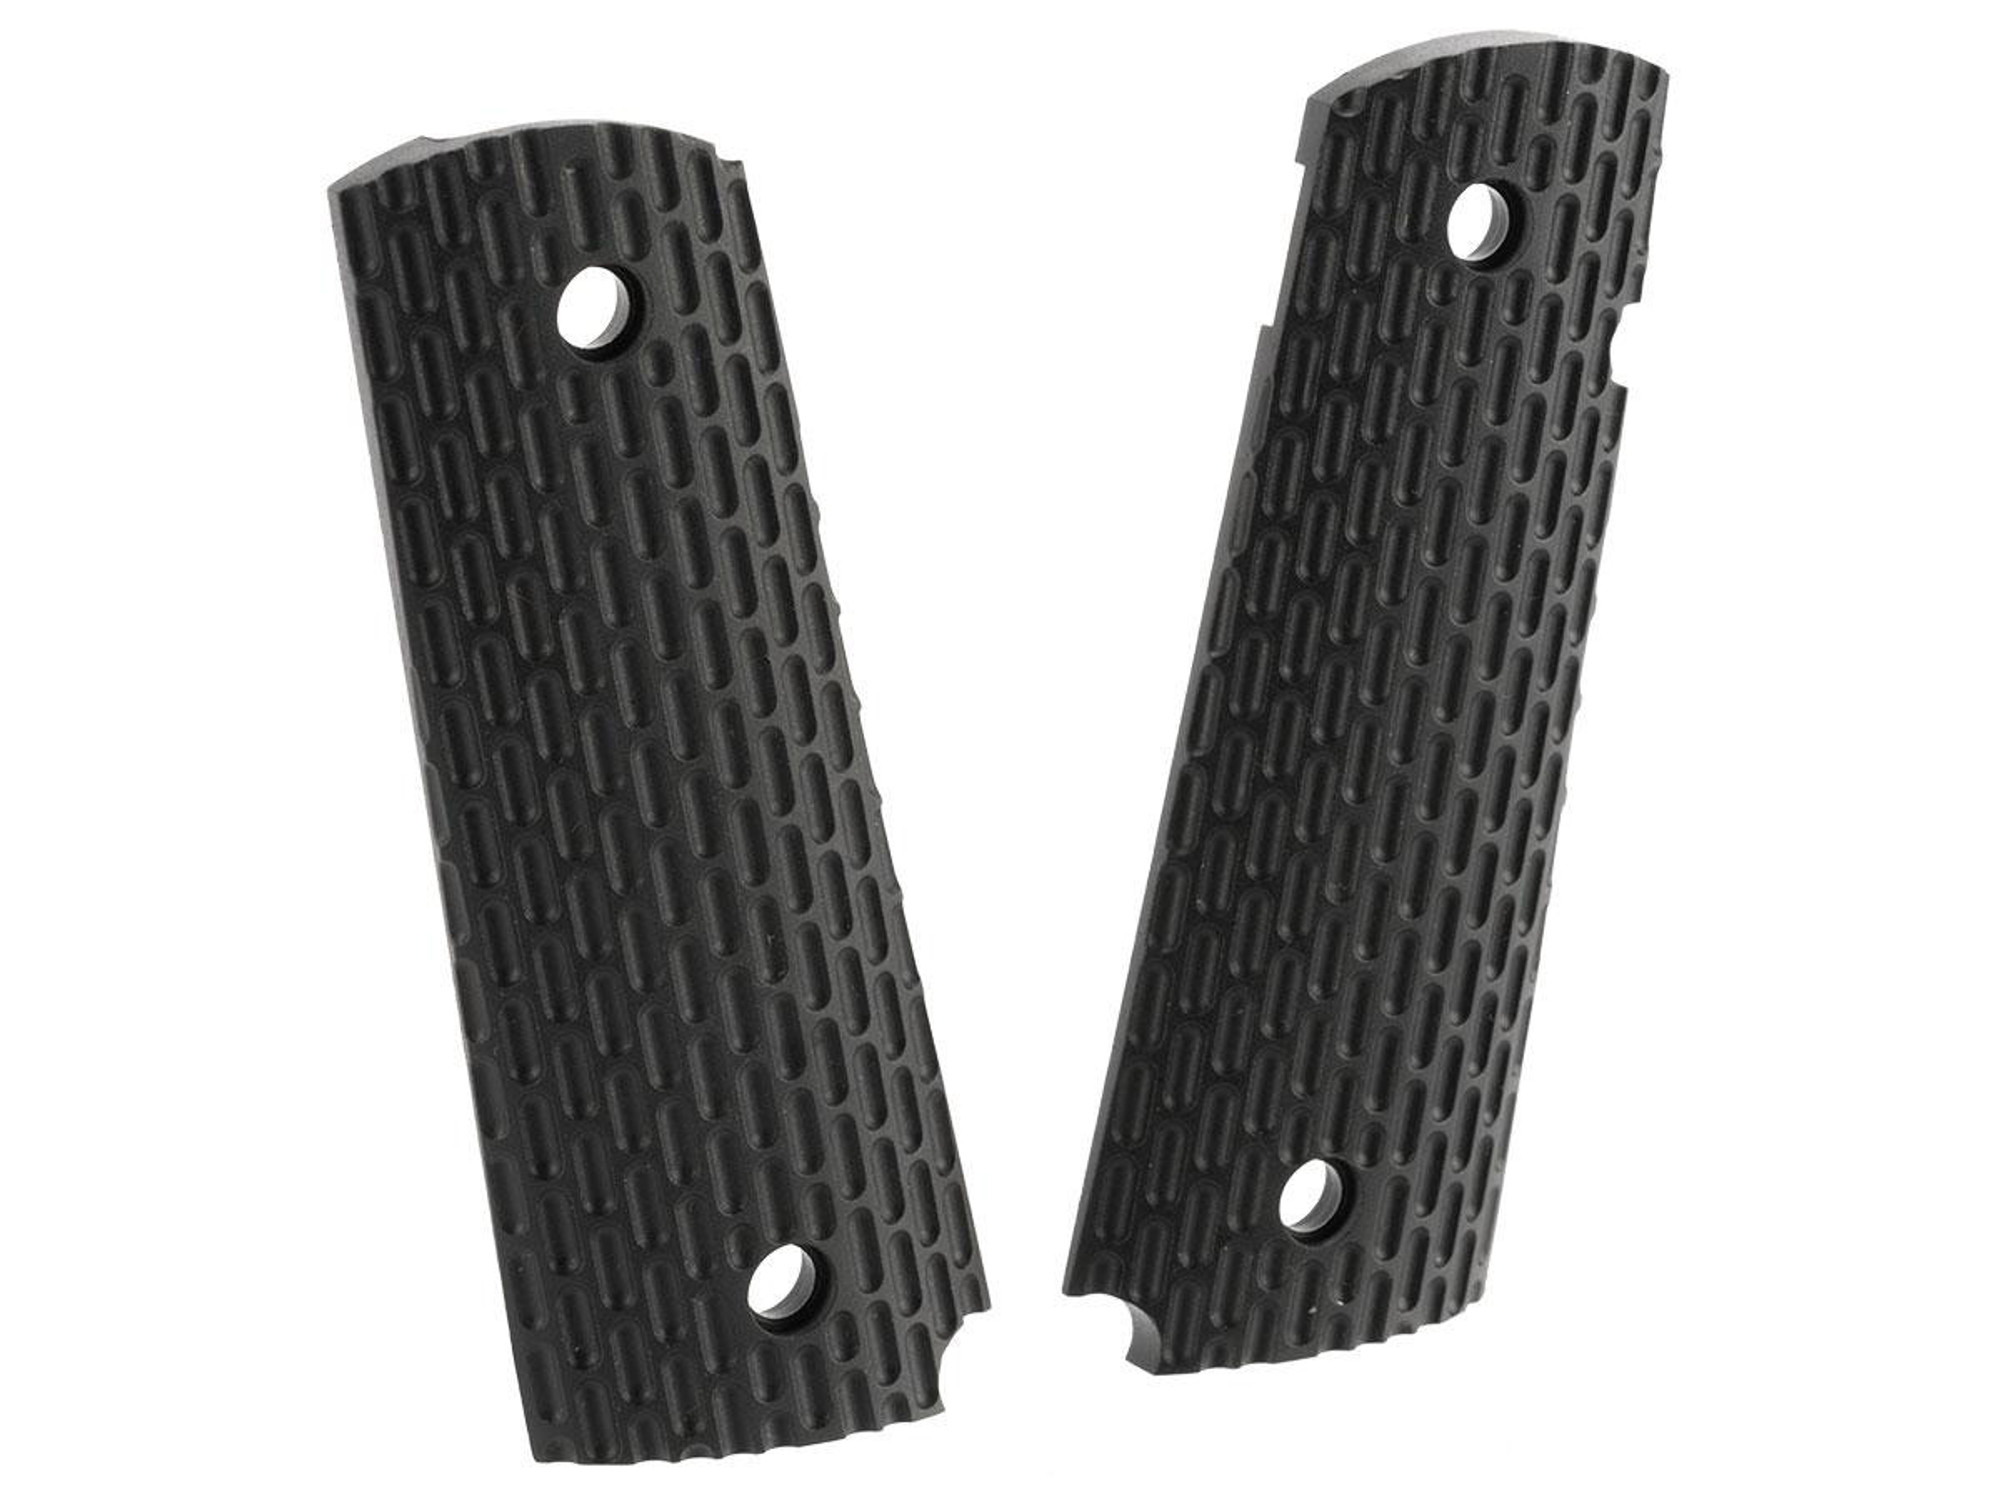 Replacement Grip Panels for KWA MKII Gas Blowback 1911 Airsoft Pistols